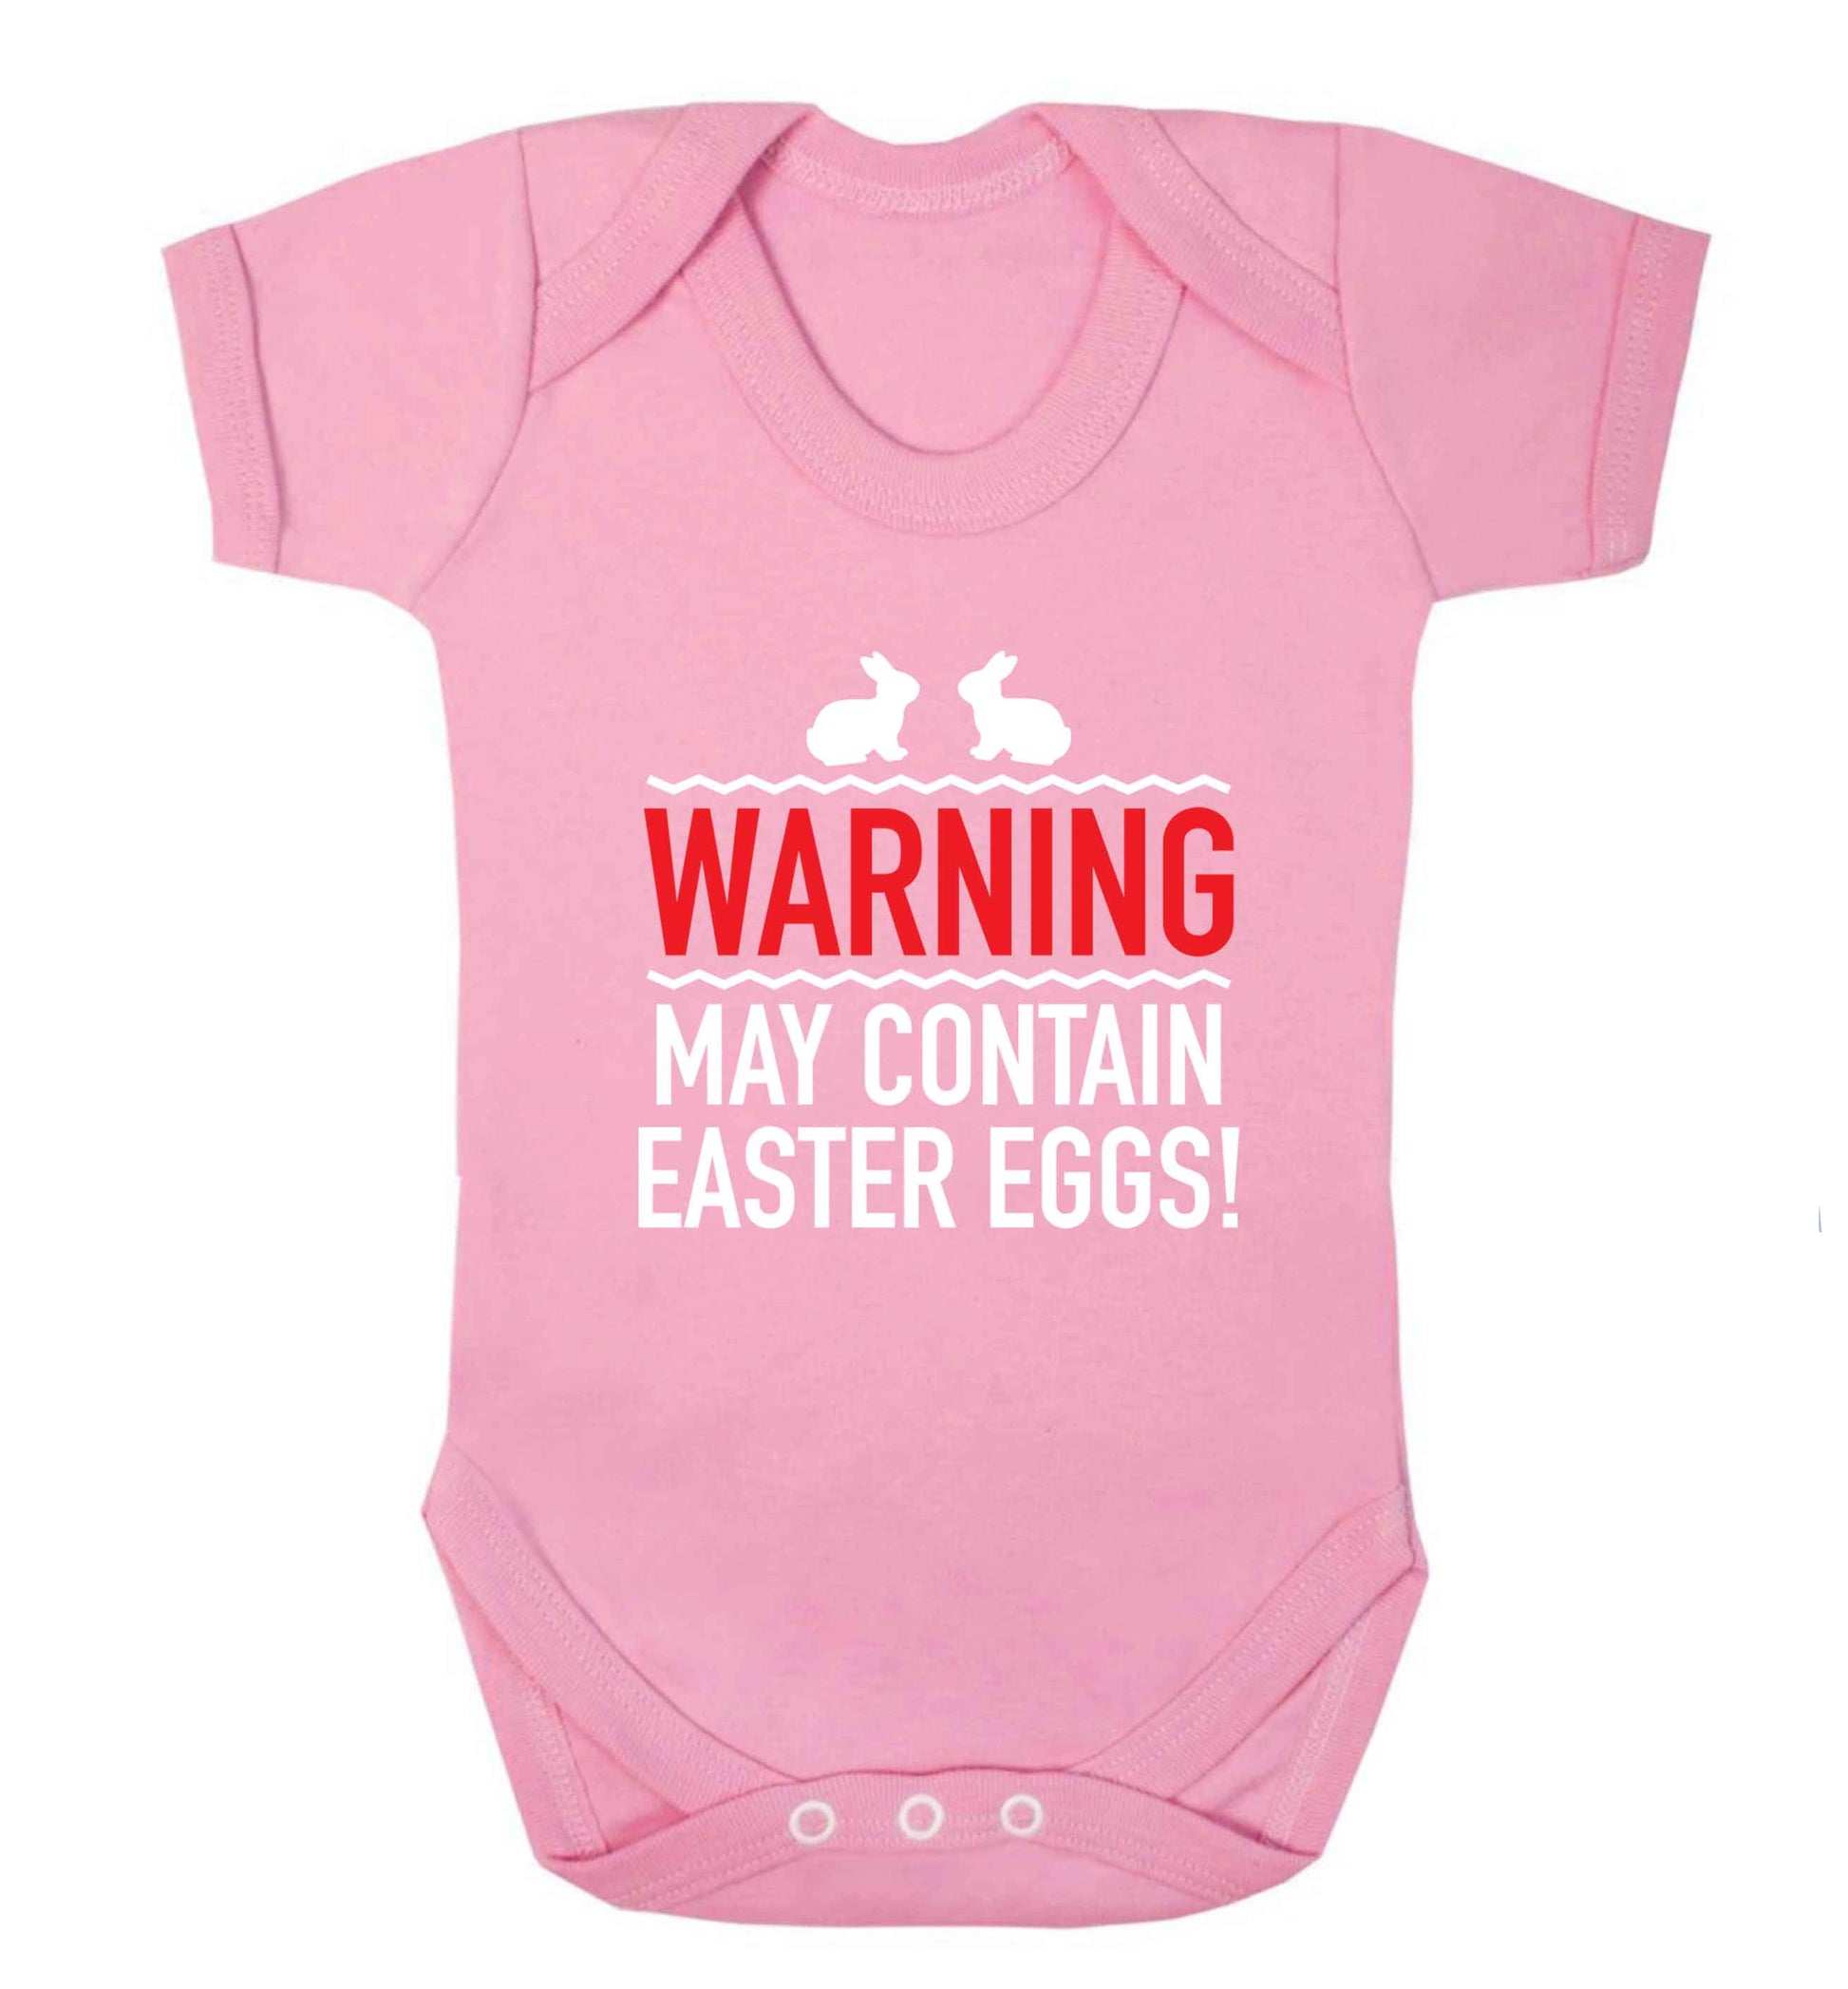 Warning may contain Easter eggs baby vest pale pink 18-24 months